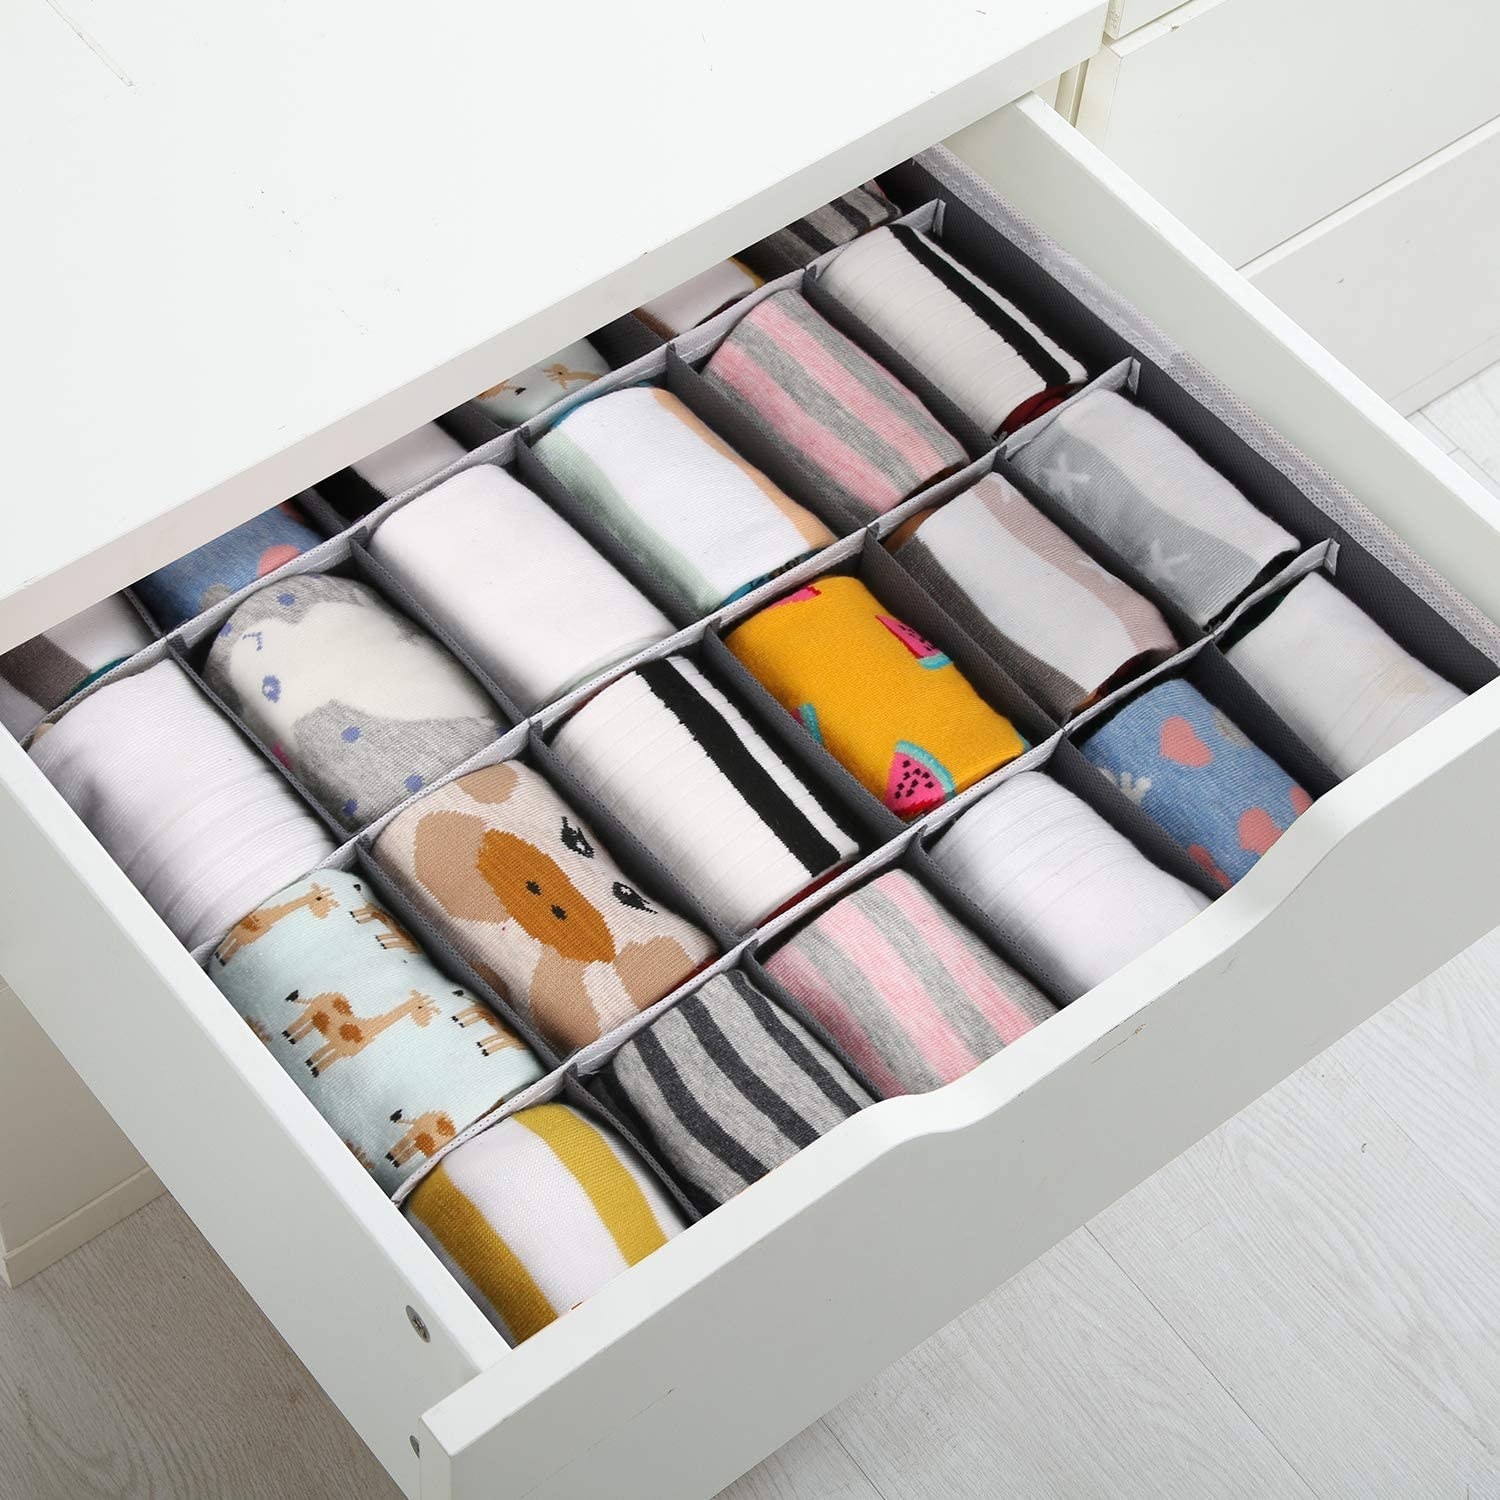 the drawer dividers dividing rolled up socks in a drawer